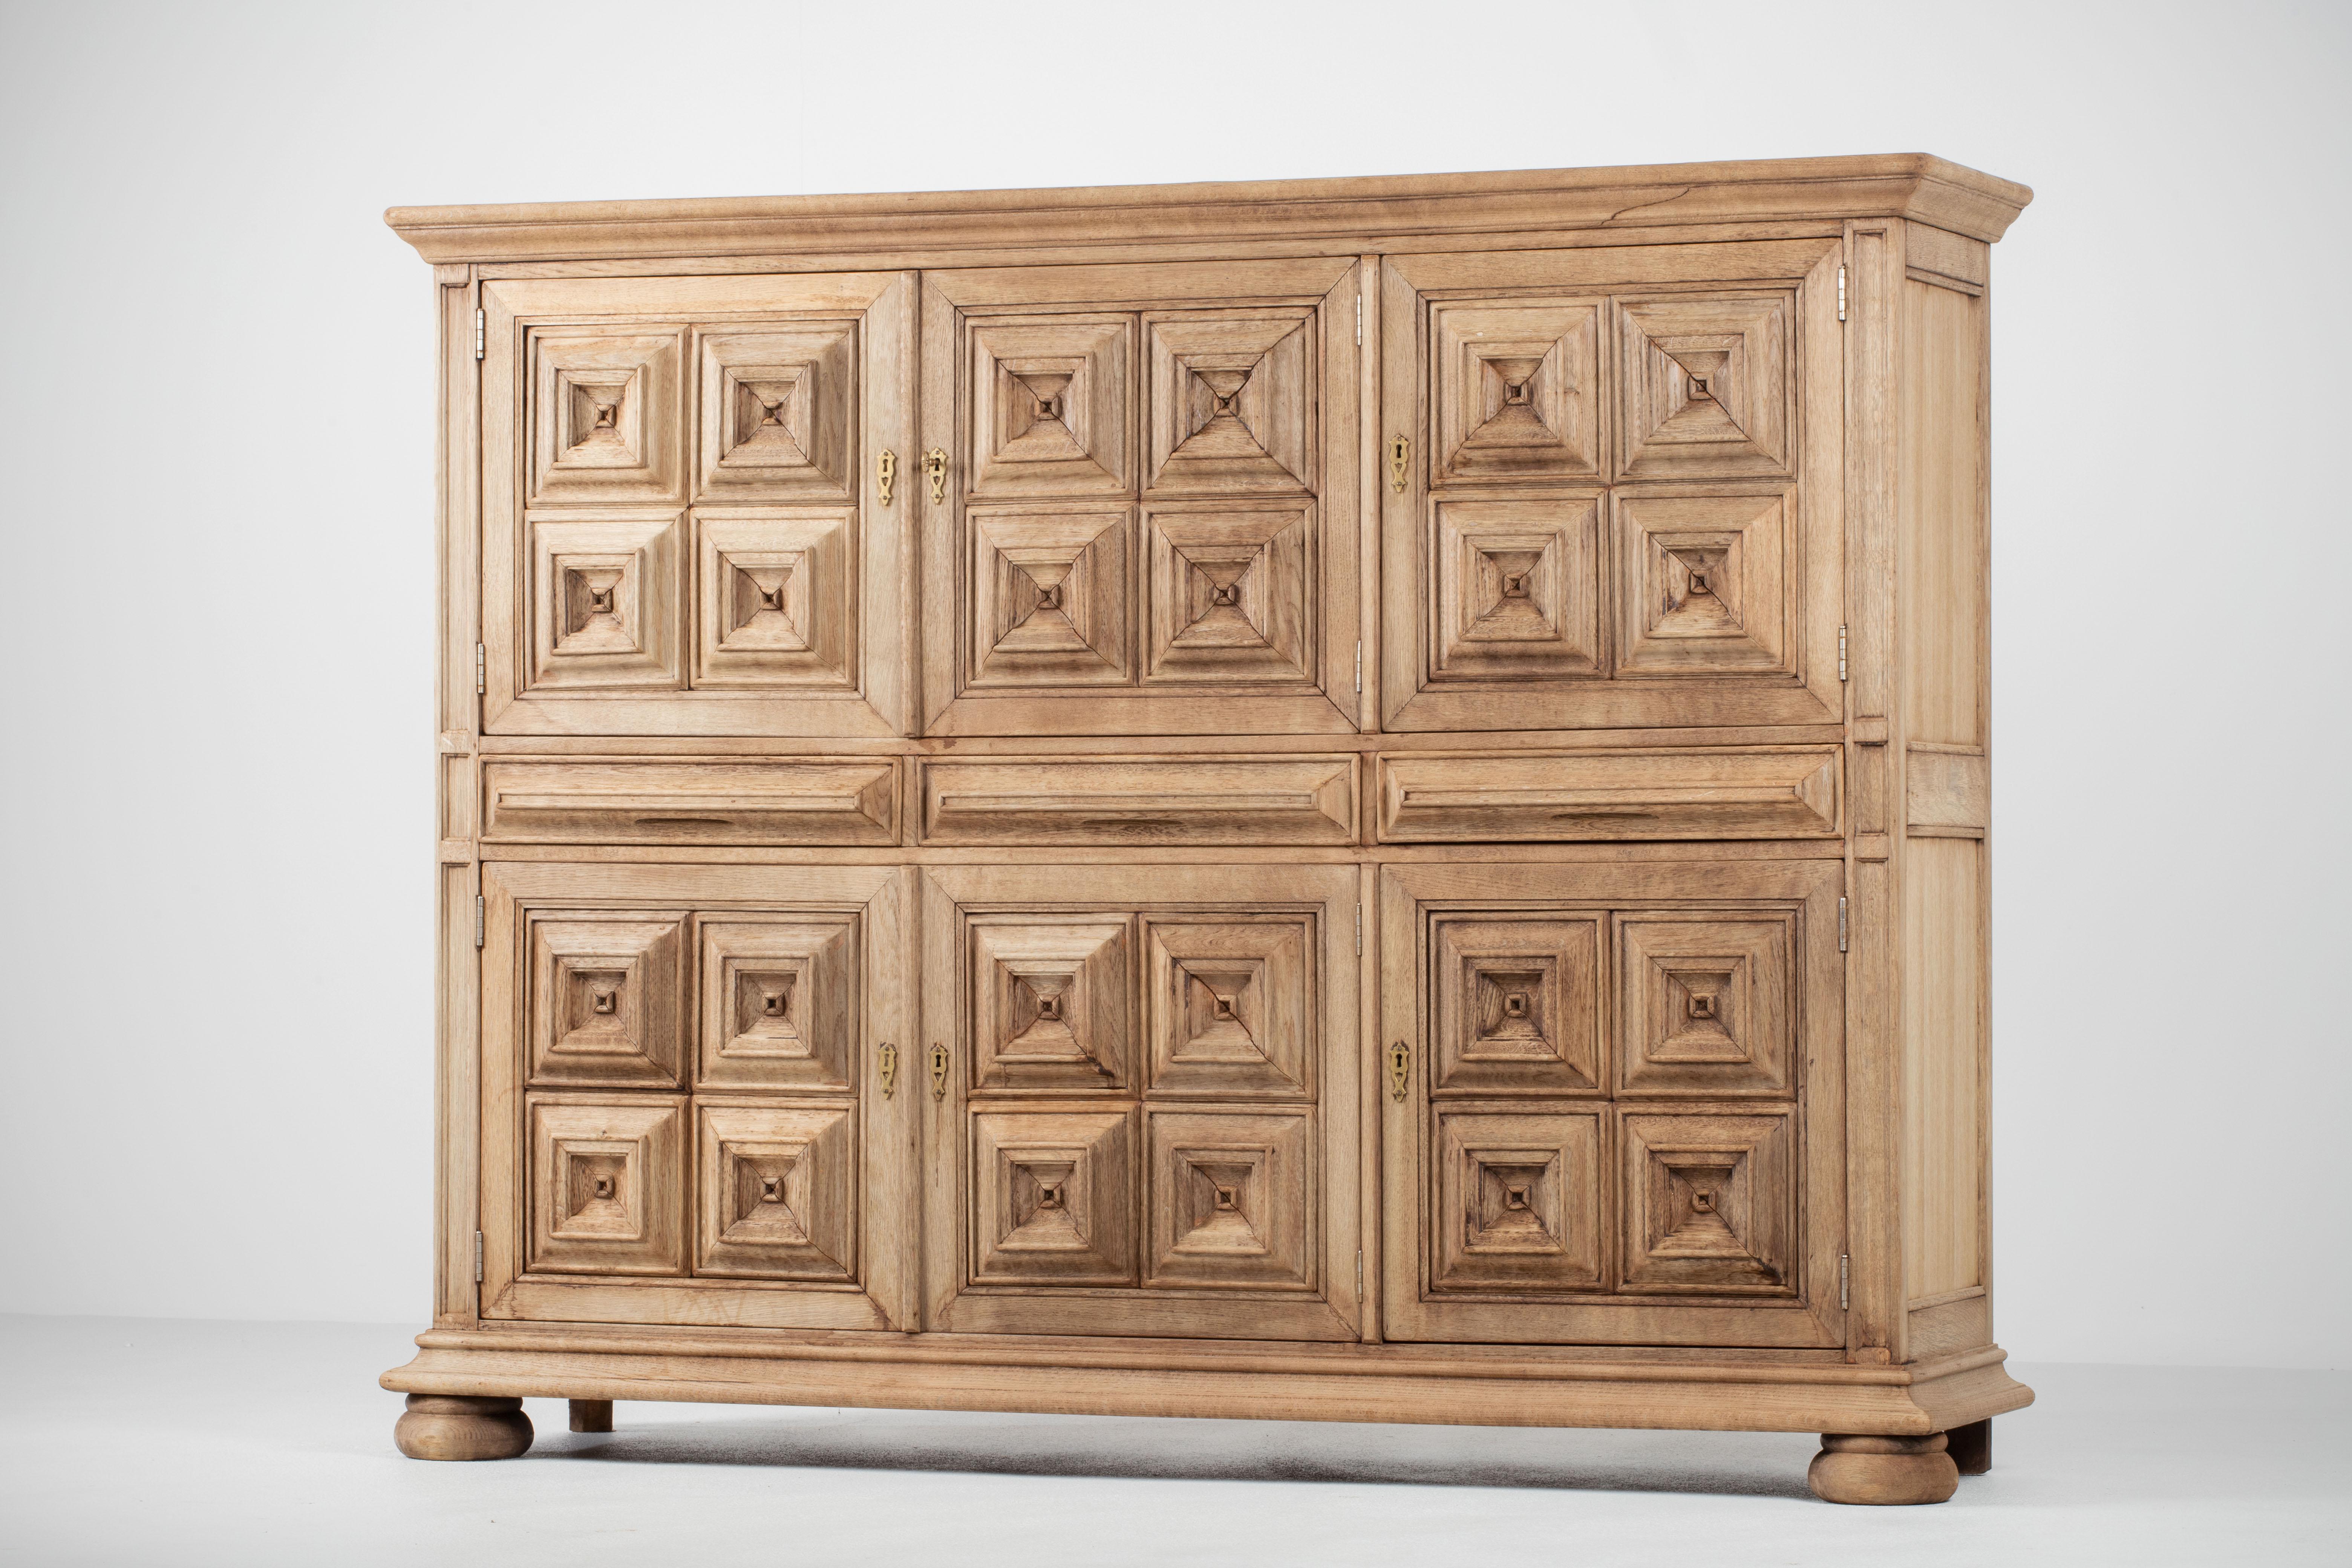 Brutalist solid oak sideboard, credenza, Spanish Colonial. The highboard features stunning Oak structure on door panels. It offers ample storage, with shelve behind the doors. A unique blend of Art Deco Spanish and Brutalist Modern design. The